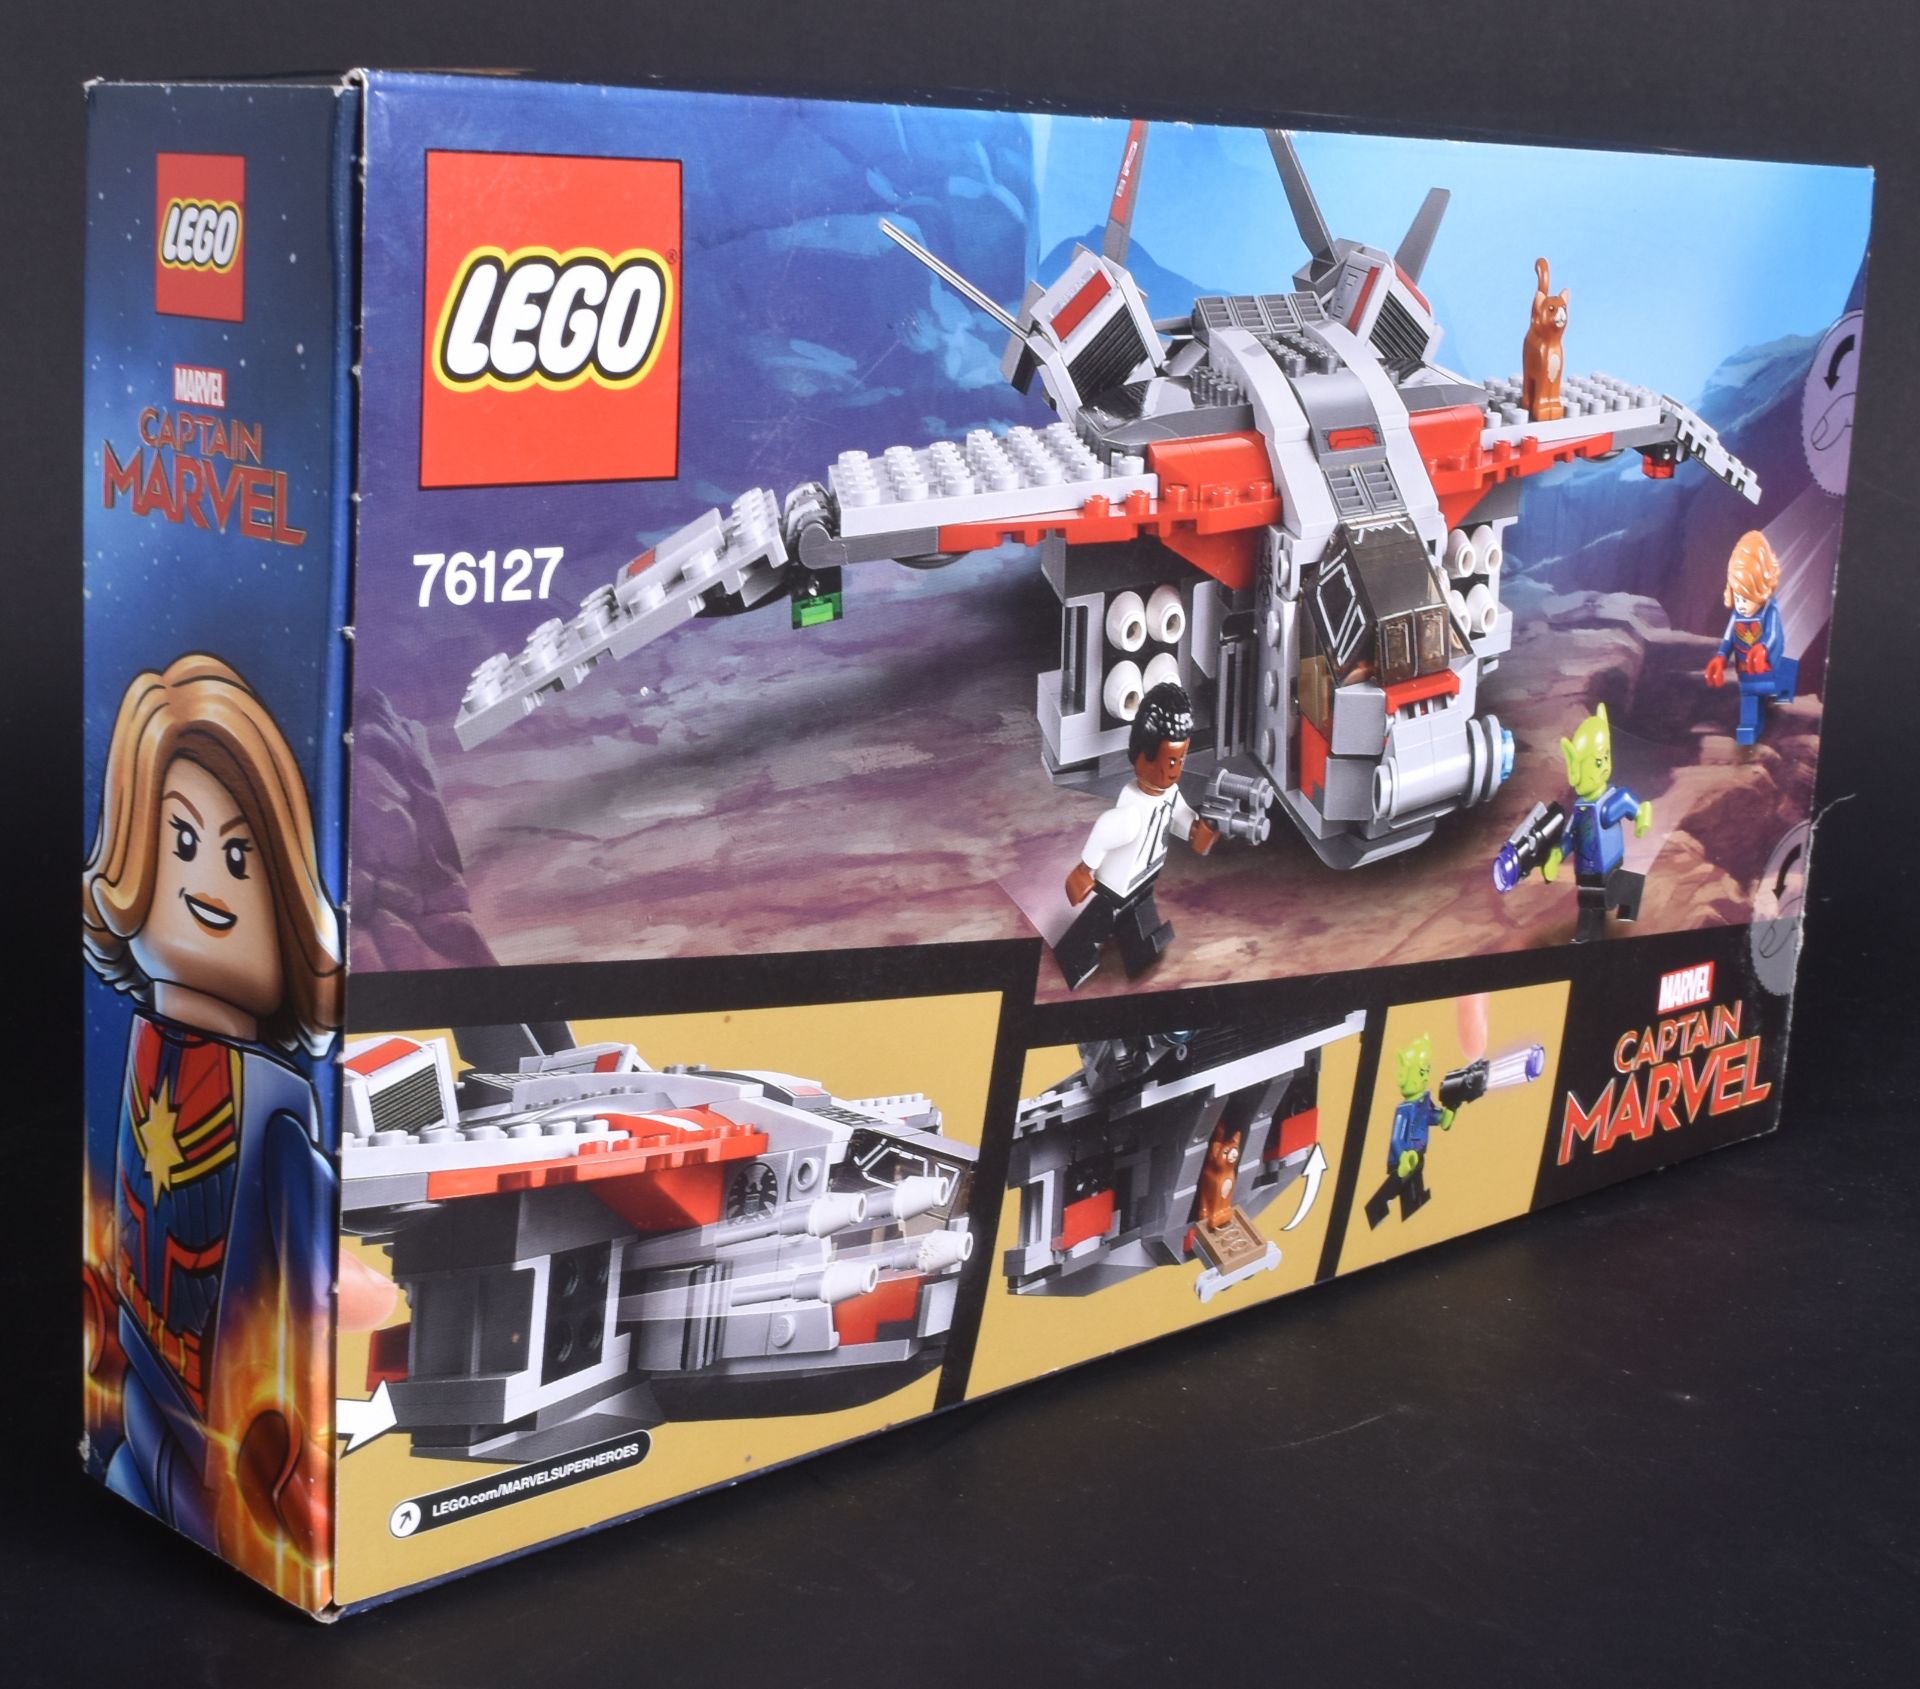 LEGO SET - MARVEL - 76127 - CAPTAIN MARVEL AND THE SKRULL ATTACK - Image 2 of 2